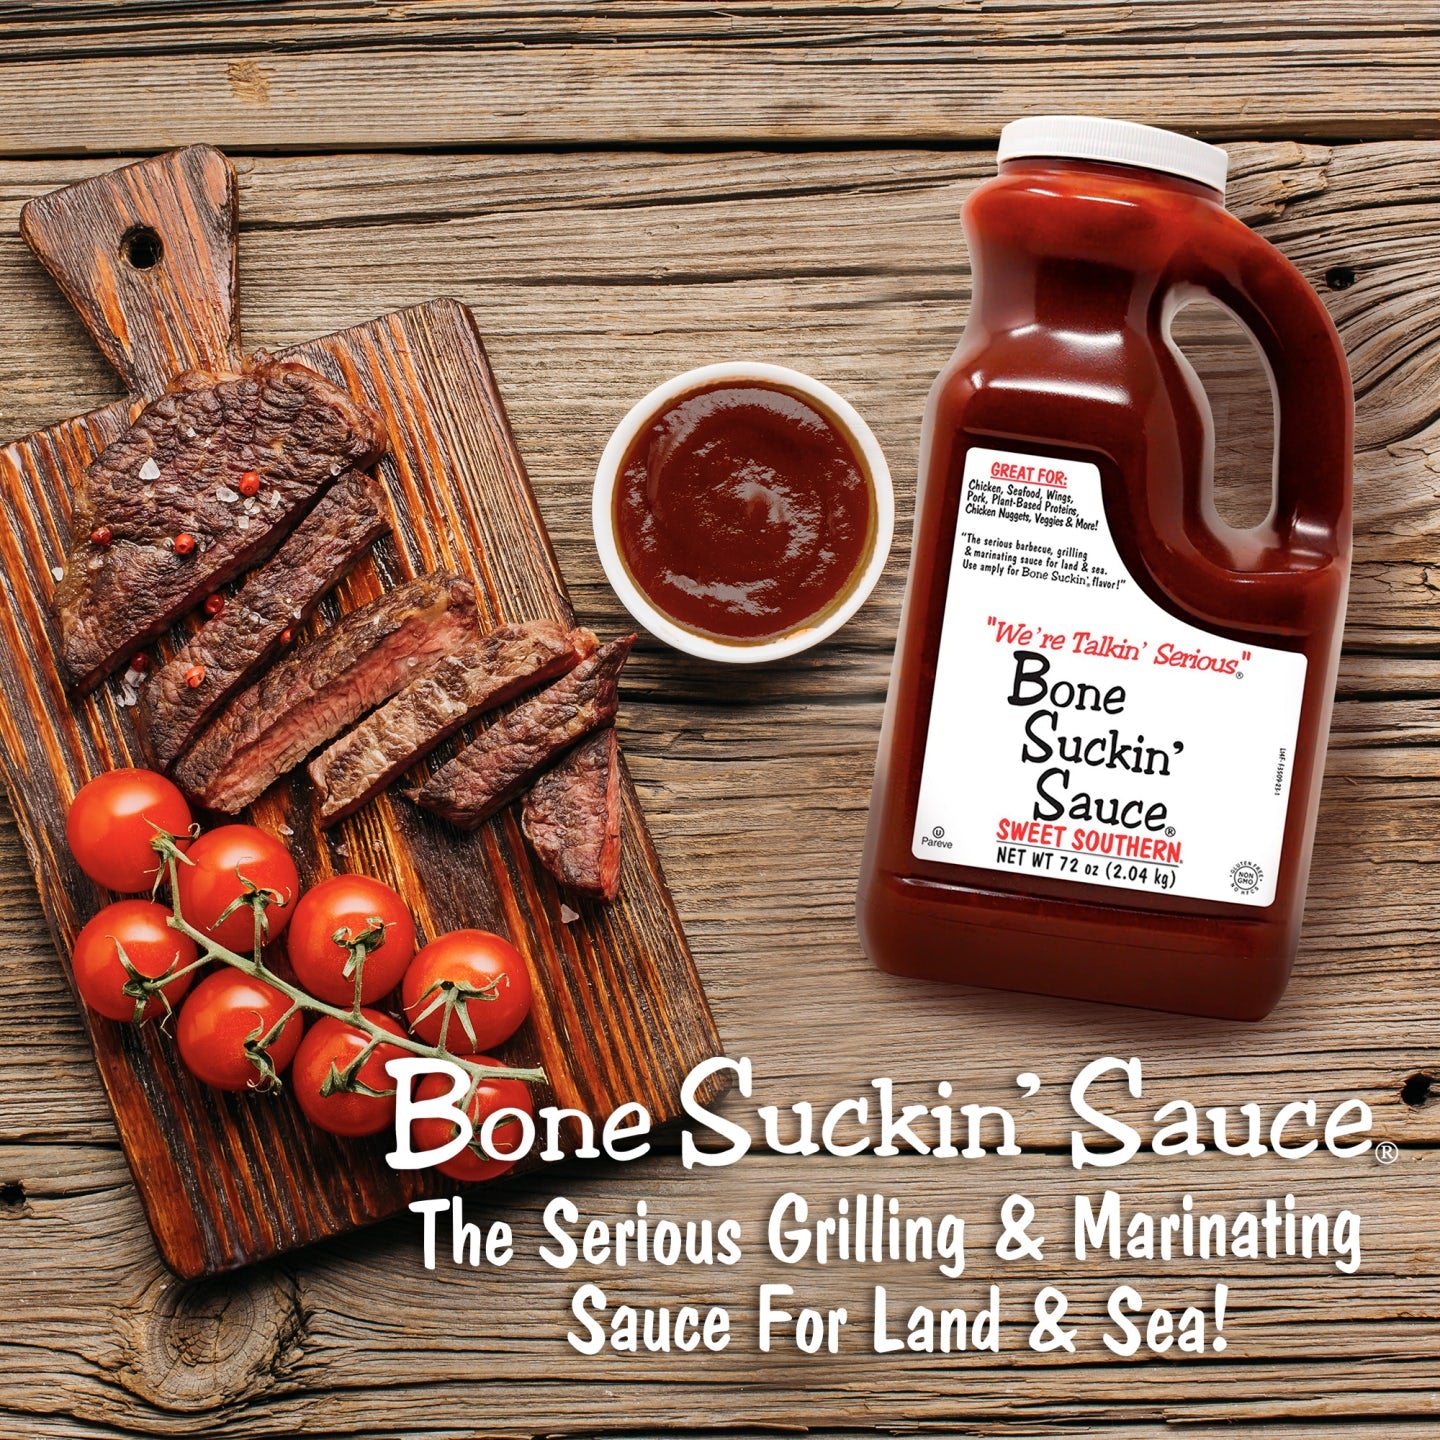 Bone Suckin' Sauce®, Sweet Southern® 72 oz. Based on our award winning family recipe, our Bone Suckin’ Sauce®, Sweet Southern™ is guaranteed to please with its sweetness, flavor & just the right amount of spices. Great for grilling & using in the oven. Use amply for that Bone Suckin’ Flavor!